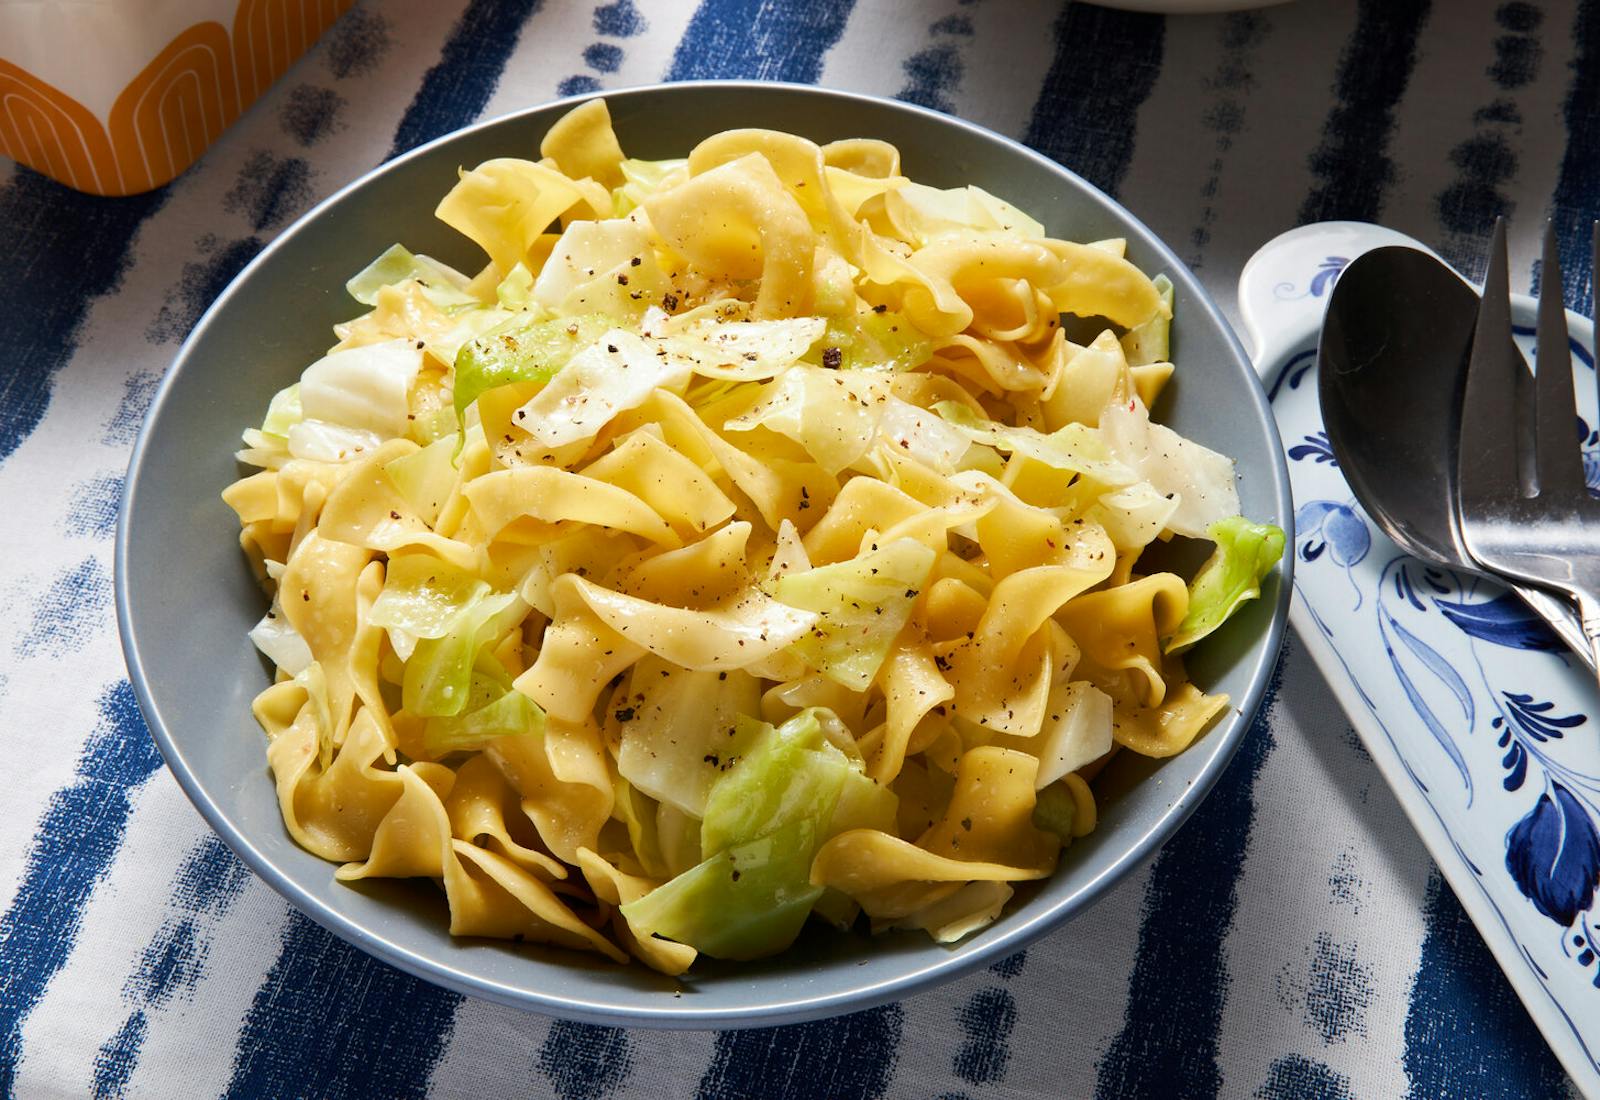 Noodles and cabbage with cracked pepper in blue bowl, atop blue and white tablecloth.